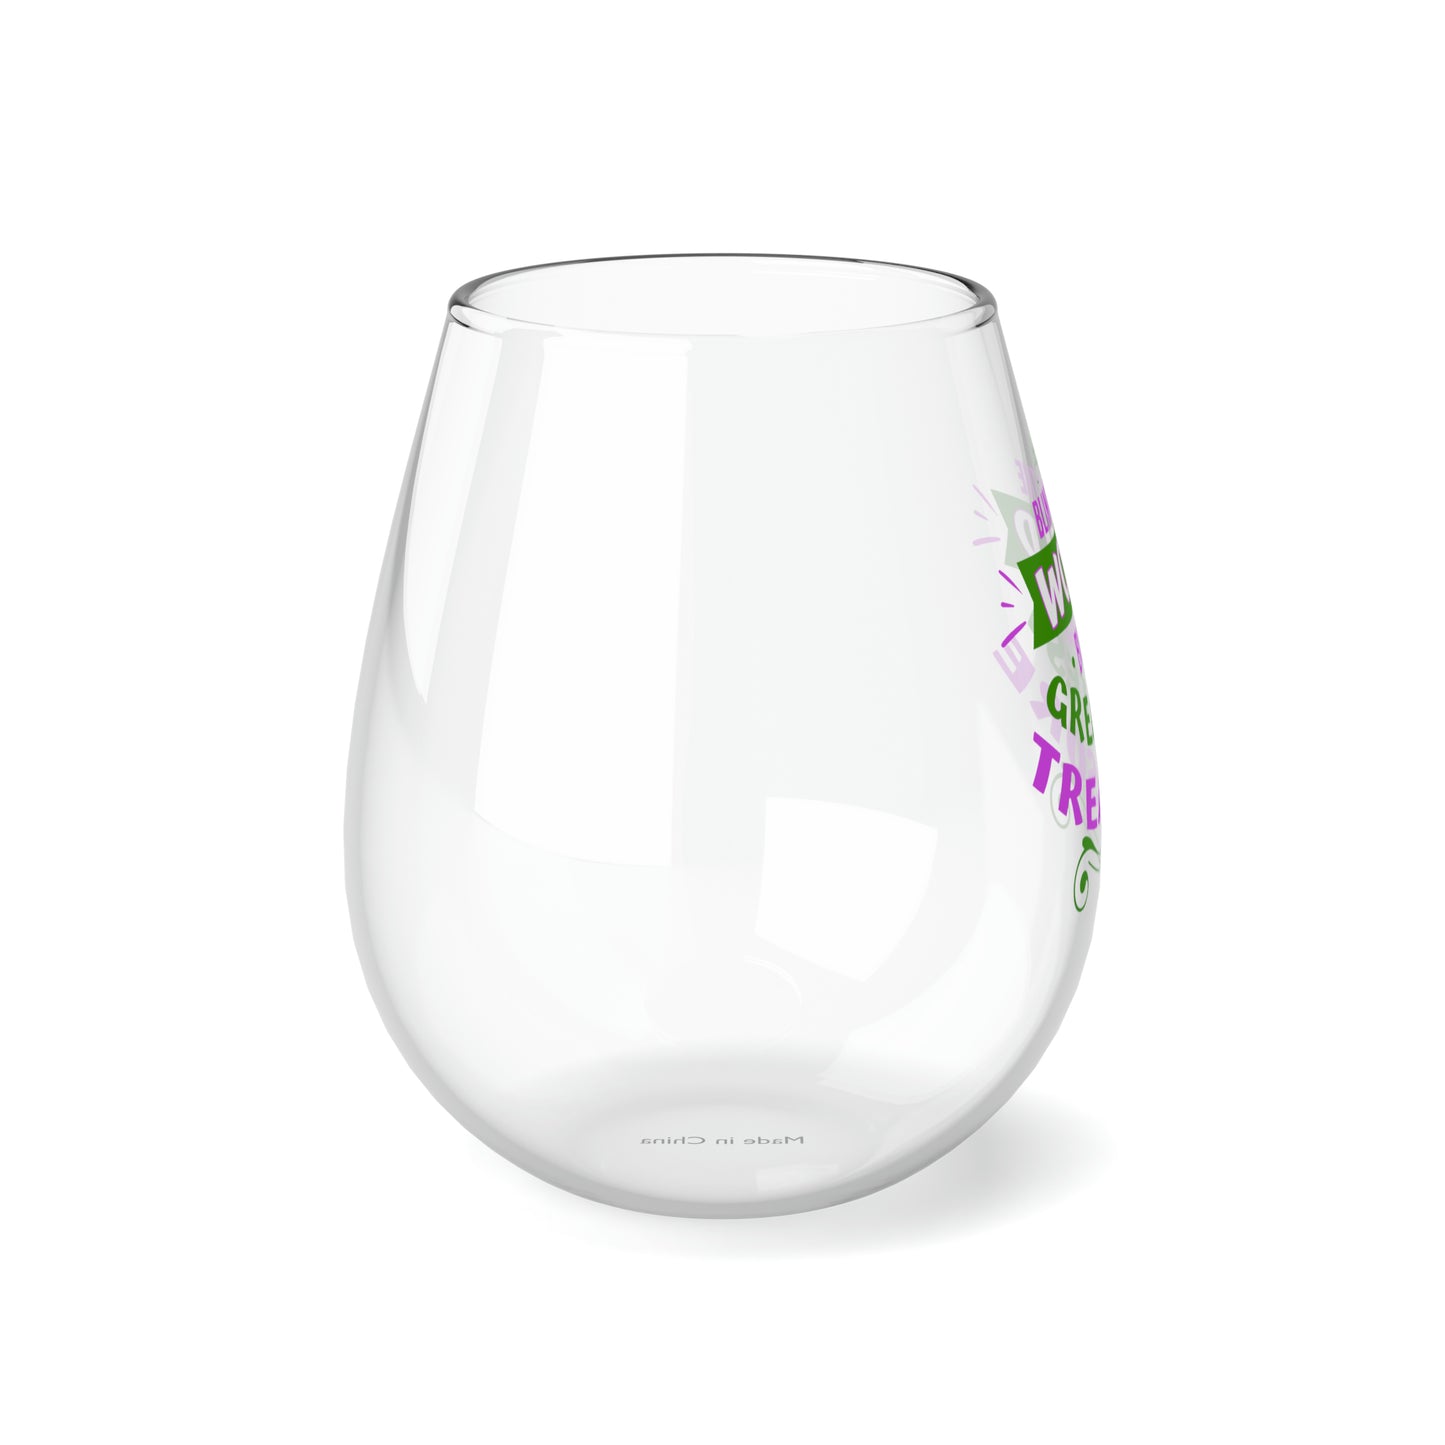 Blind To The World But His Greatest Treasure Stemless Wine Glass, 11.75oz